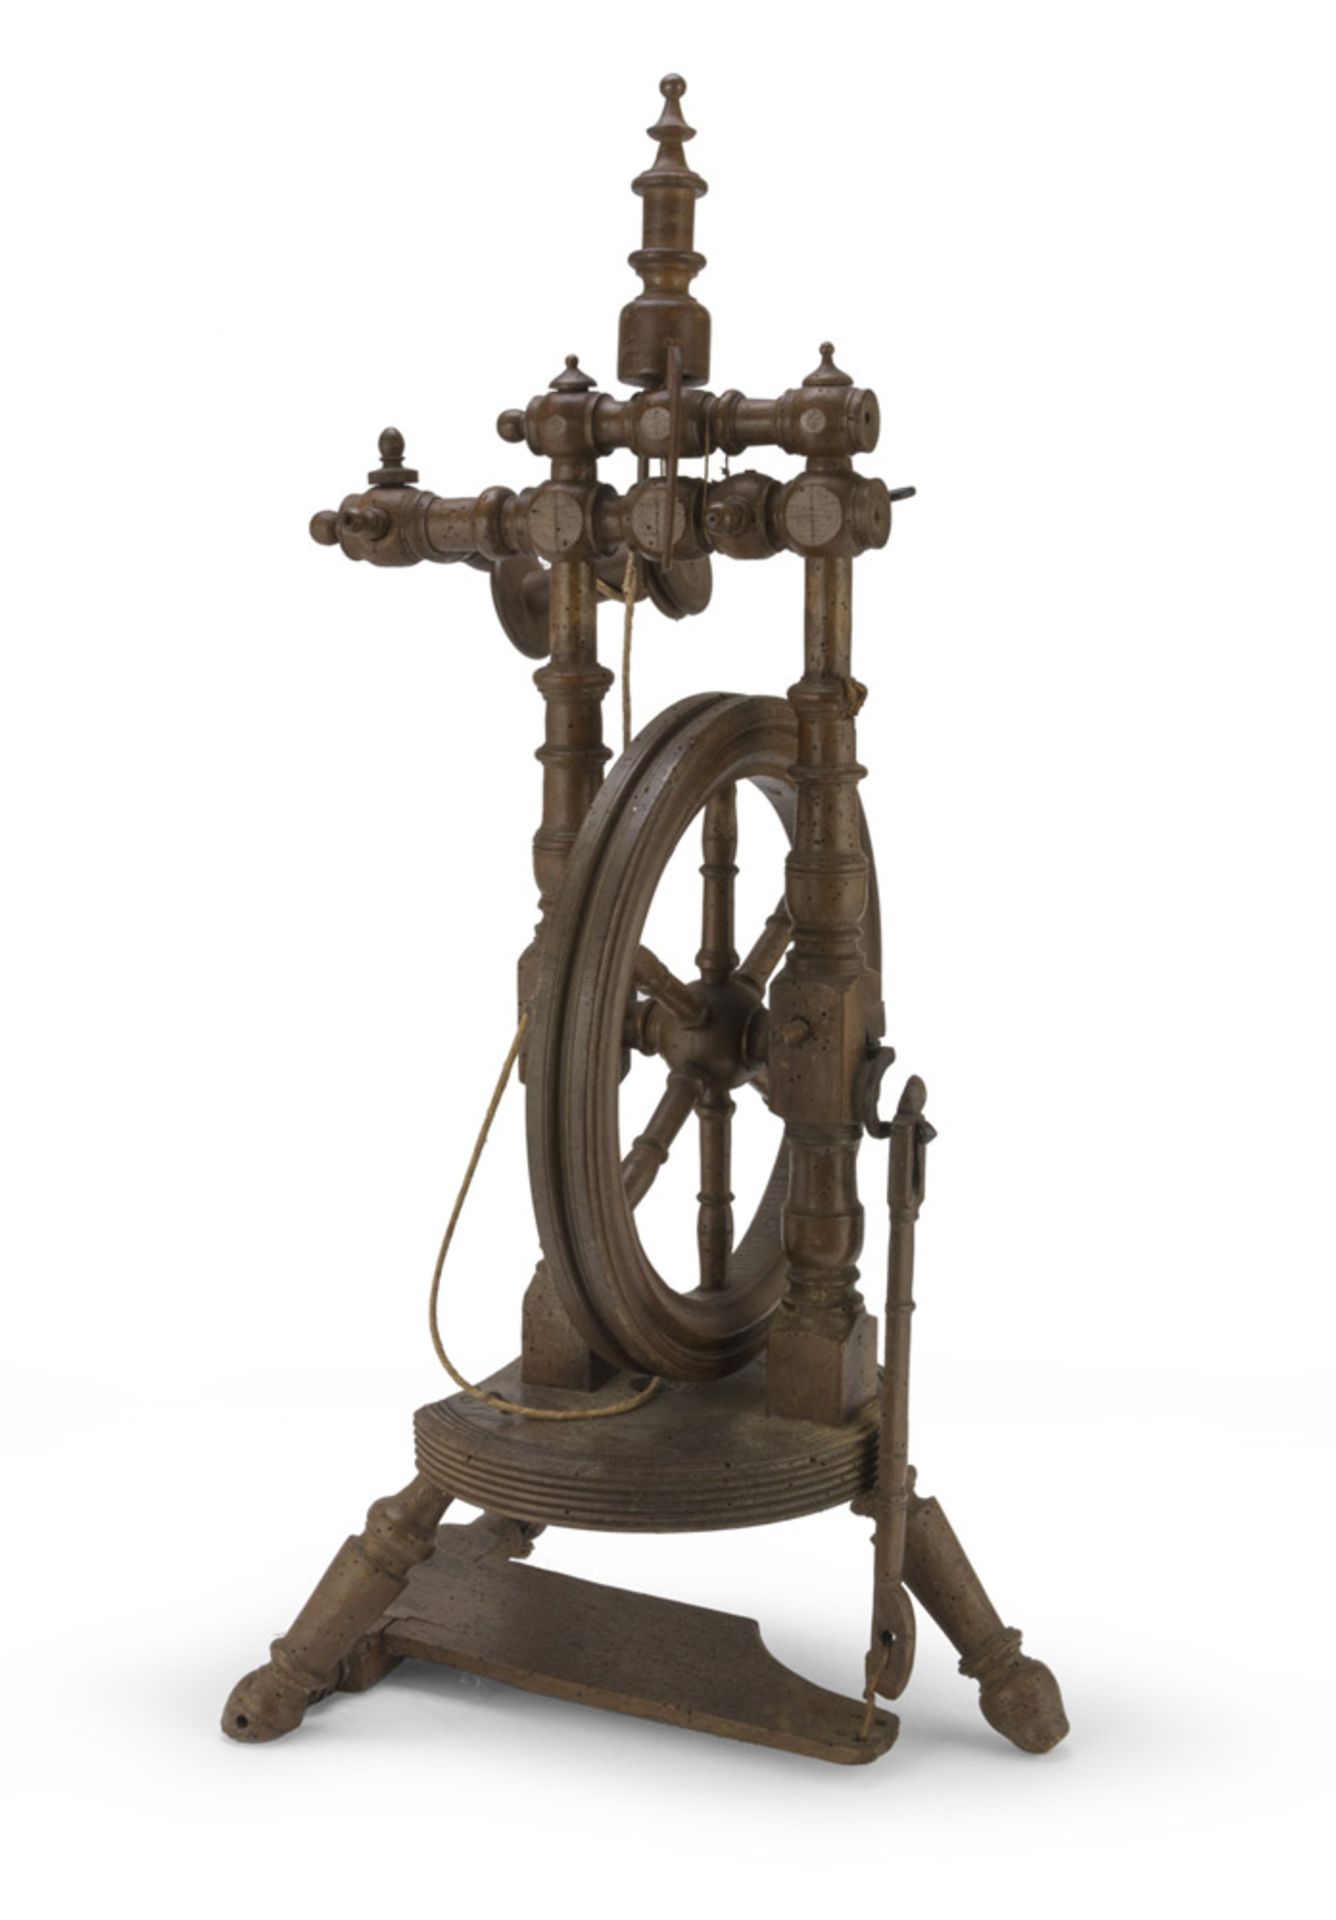 SPINNING WHEEL IN TURNED WOOD – LATE 18TH CENTURY